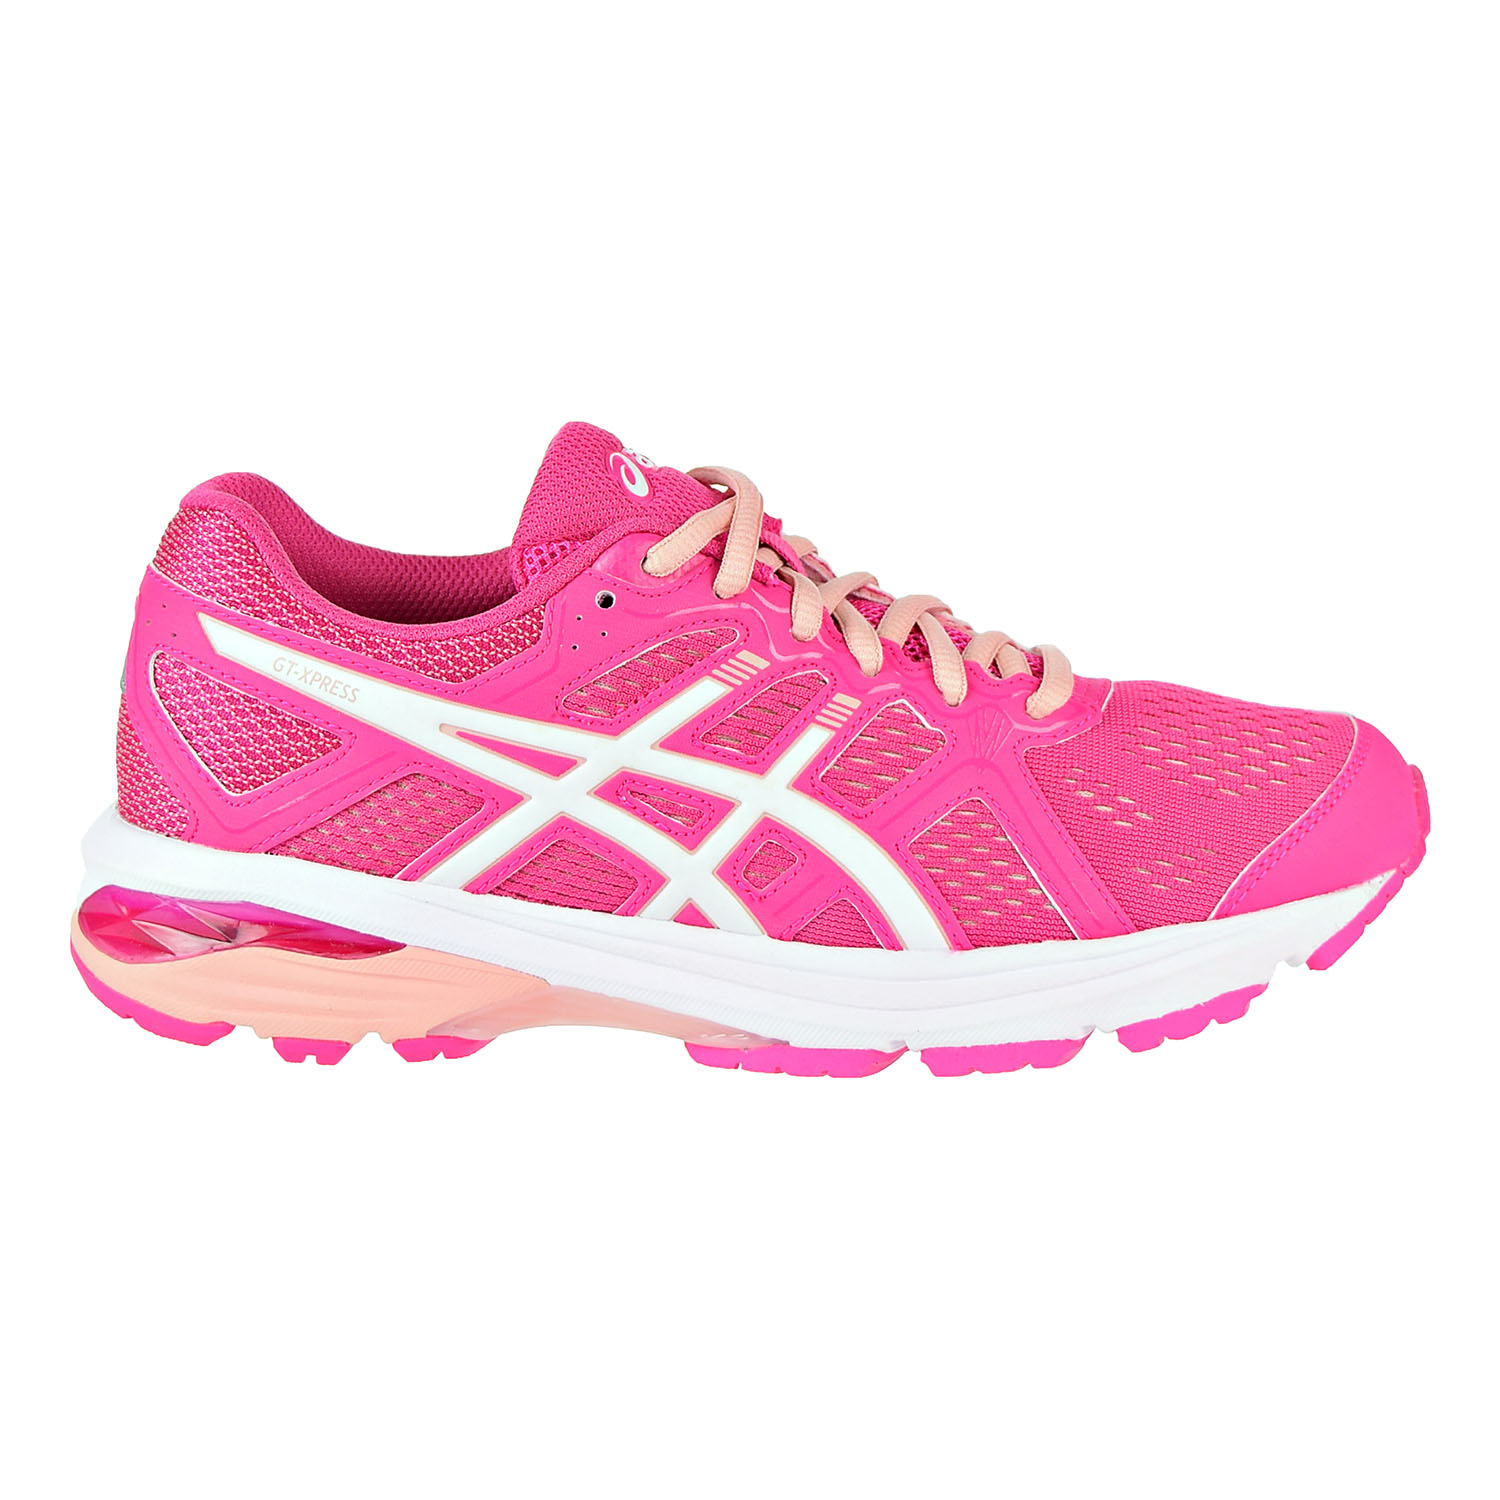 asics gt xpress ladies running shoes review